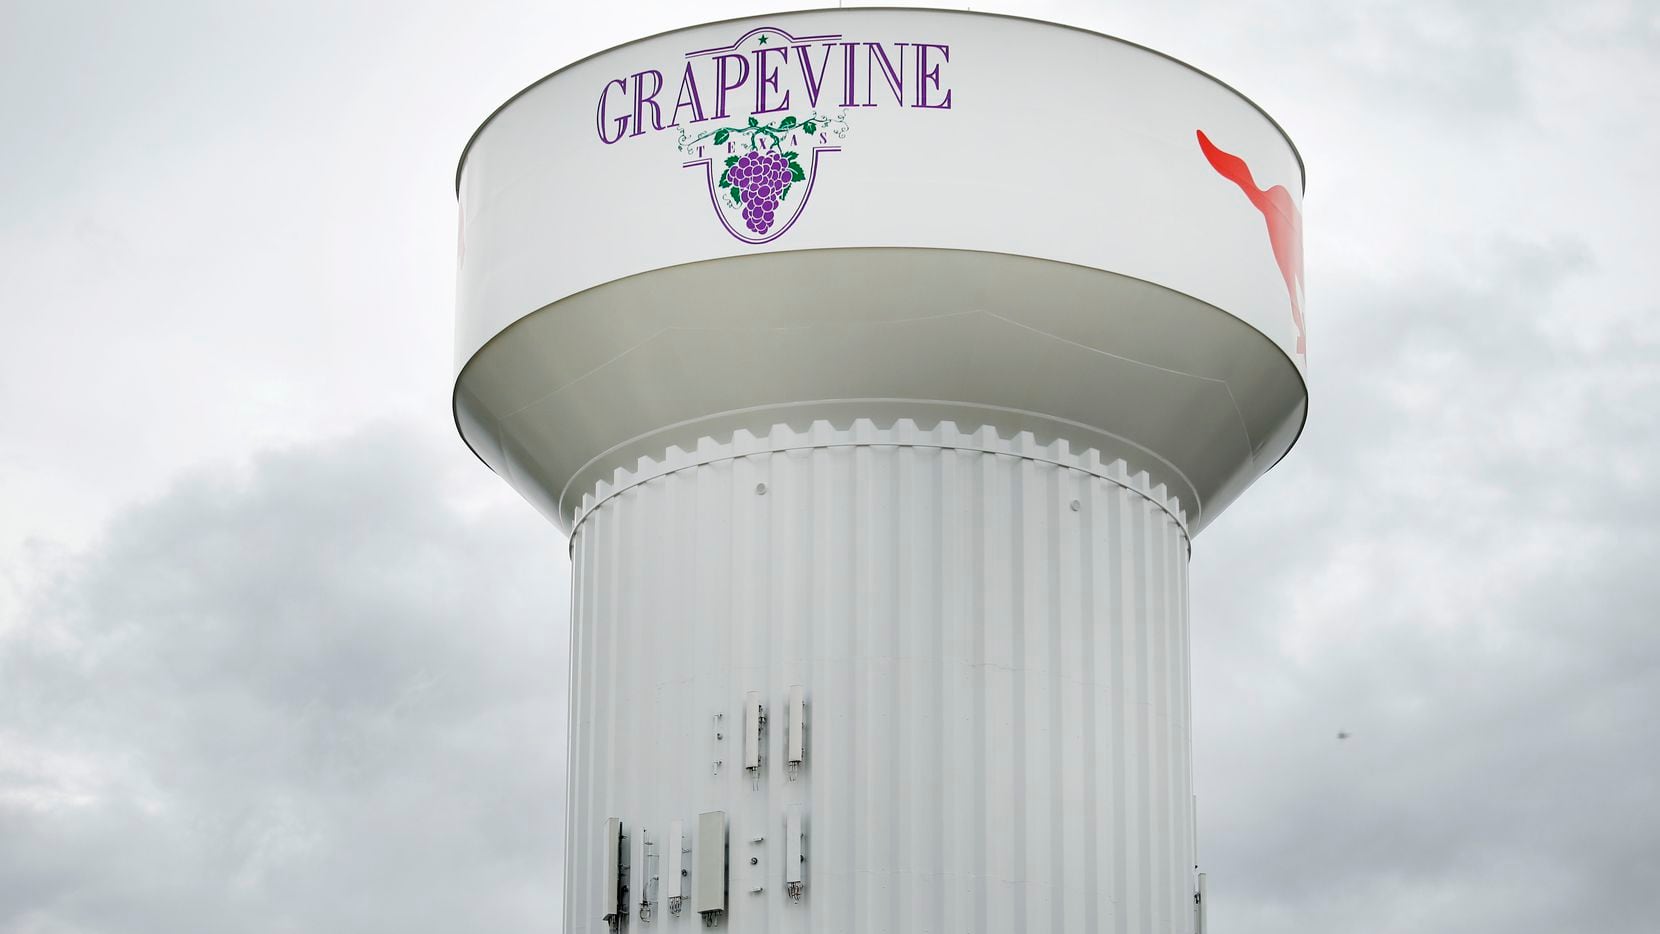 Grapevine is working to become a "Music Friendly" city. (Tom Fox/The Dallas Morning News)